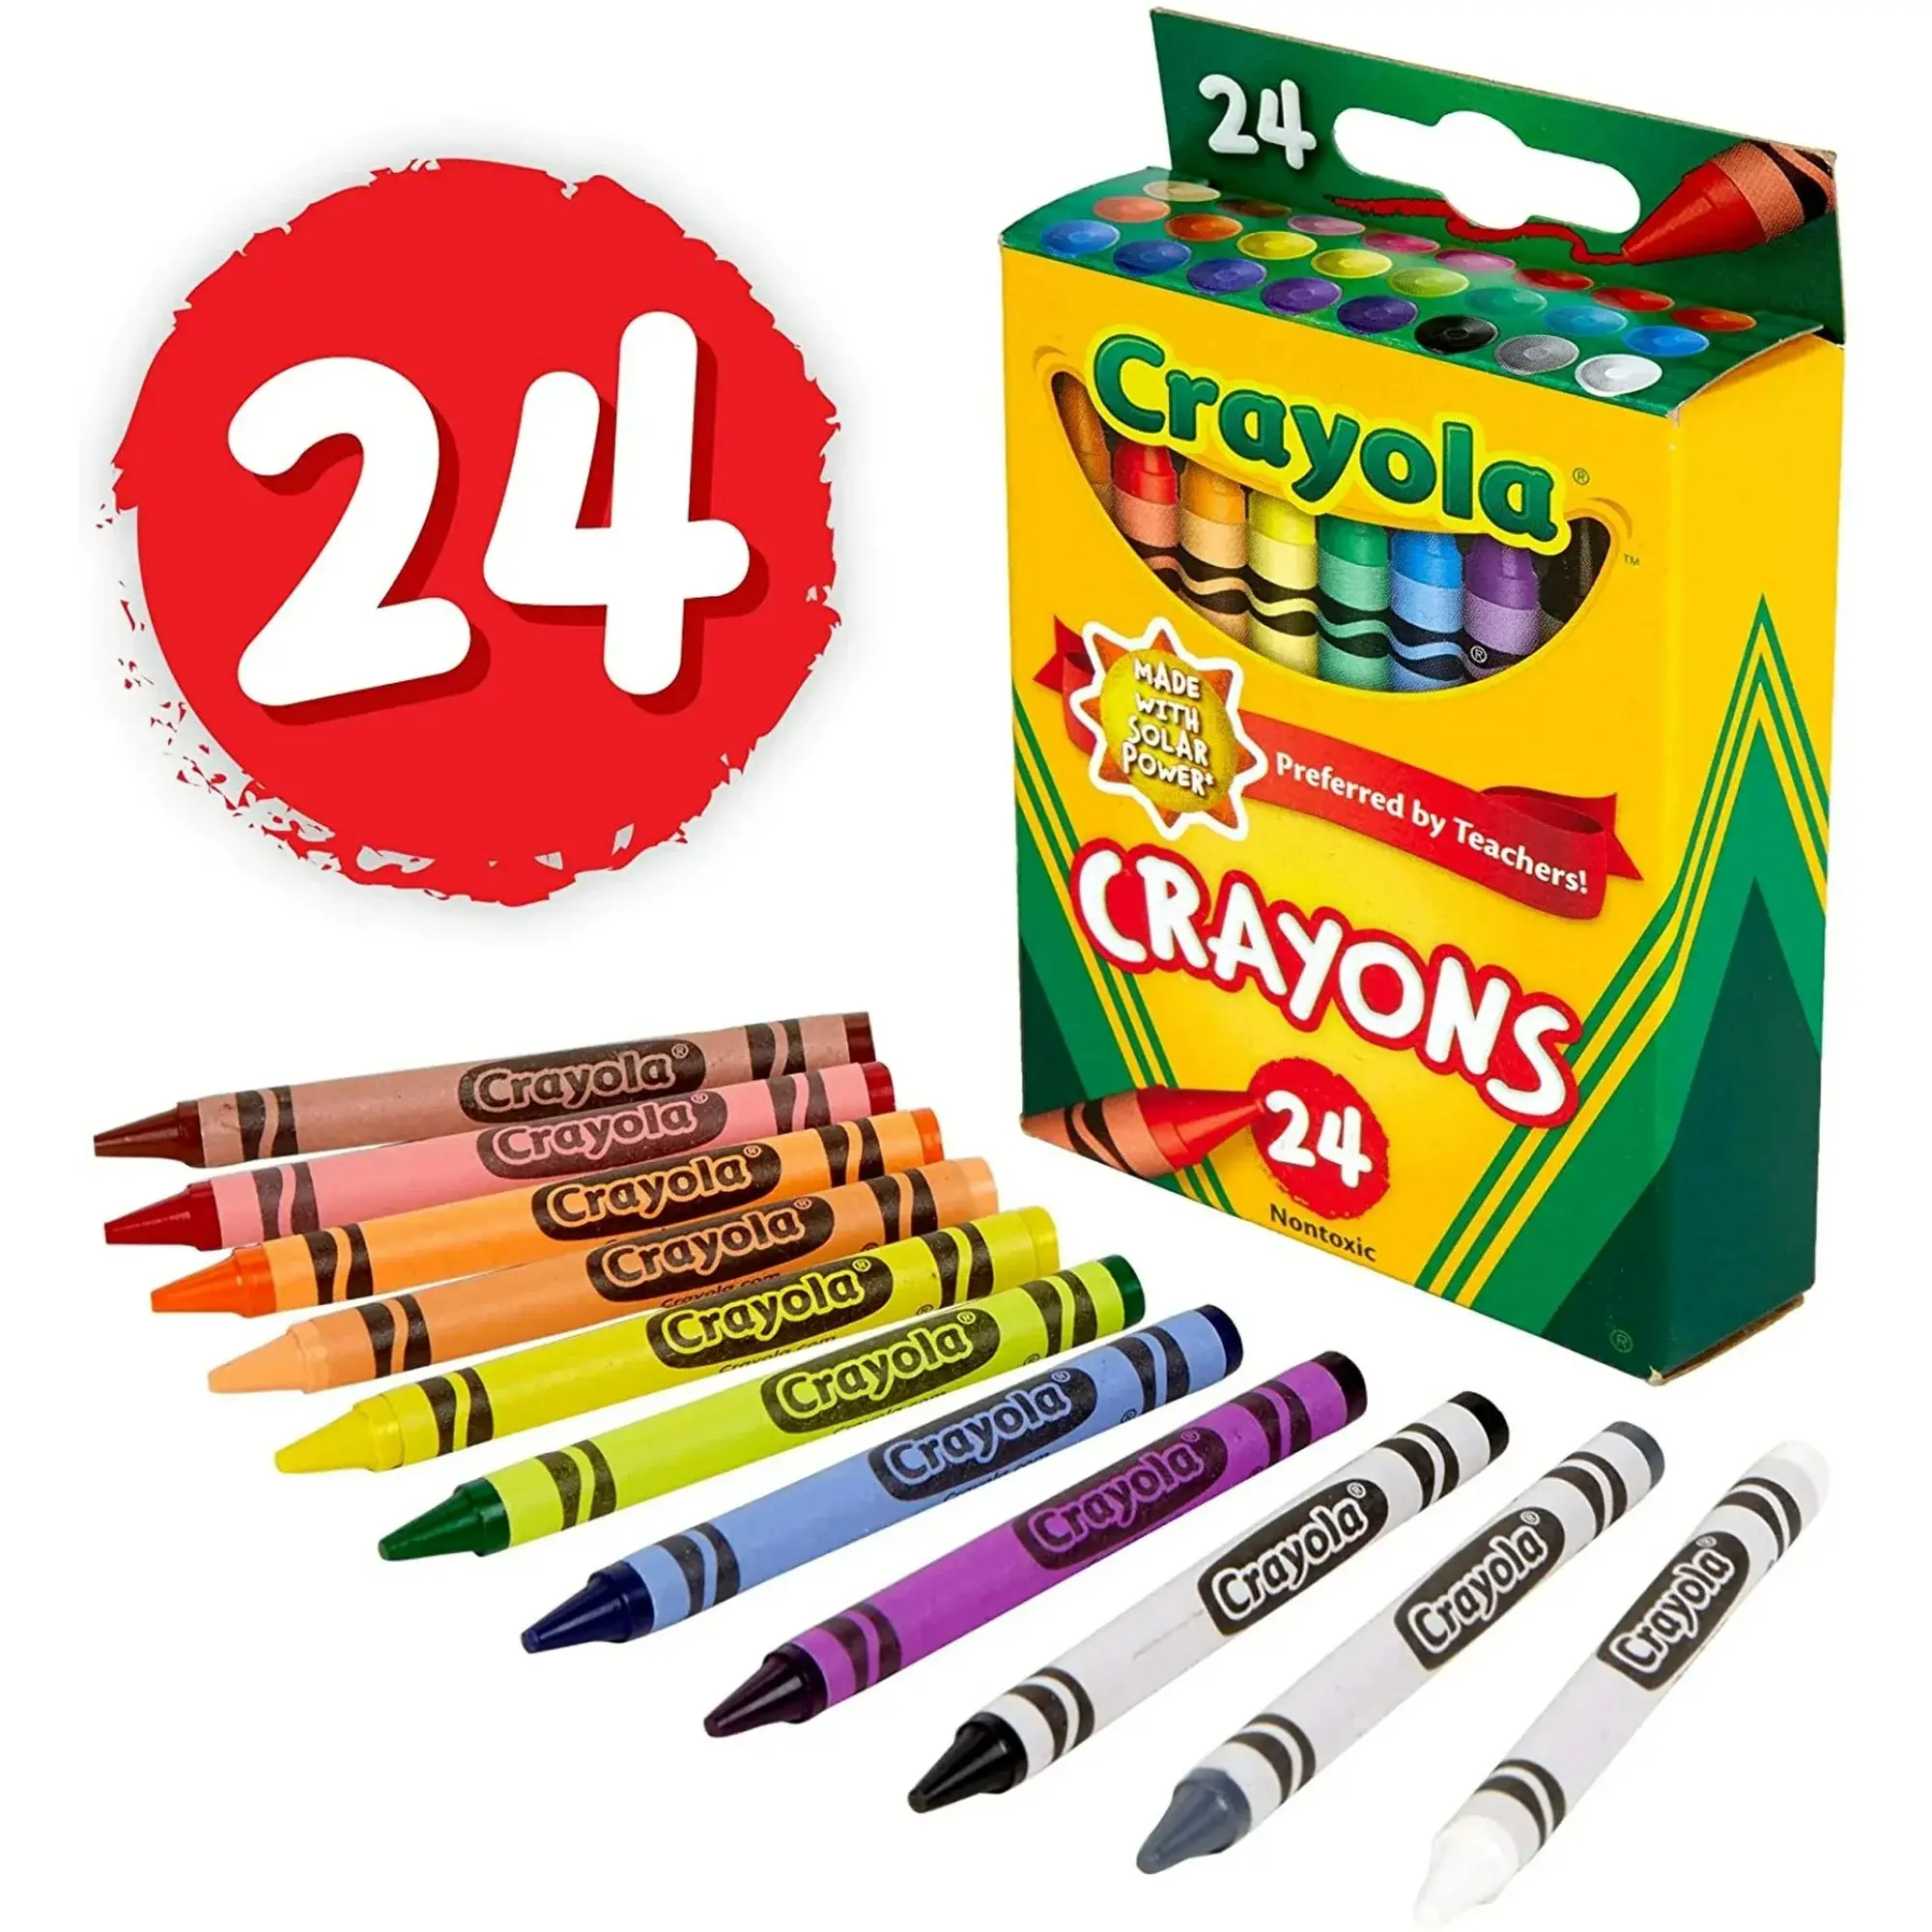 24-Count Crayola Classic Crayons (Assorted Colors)